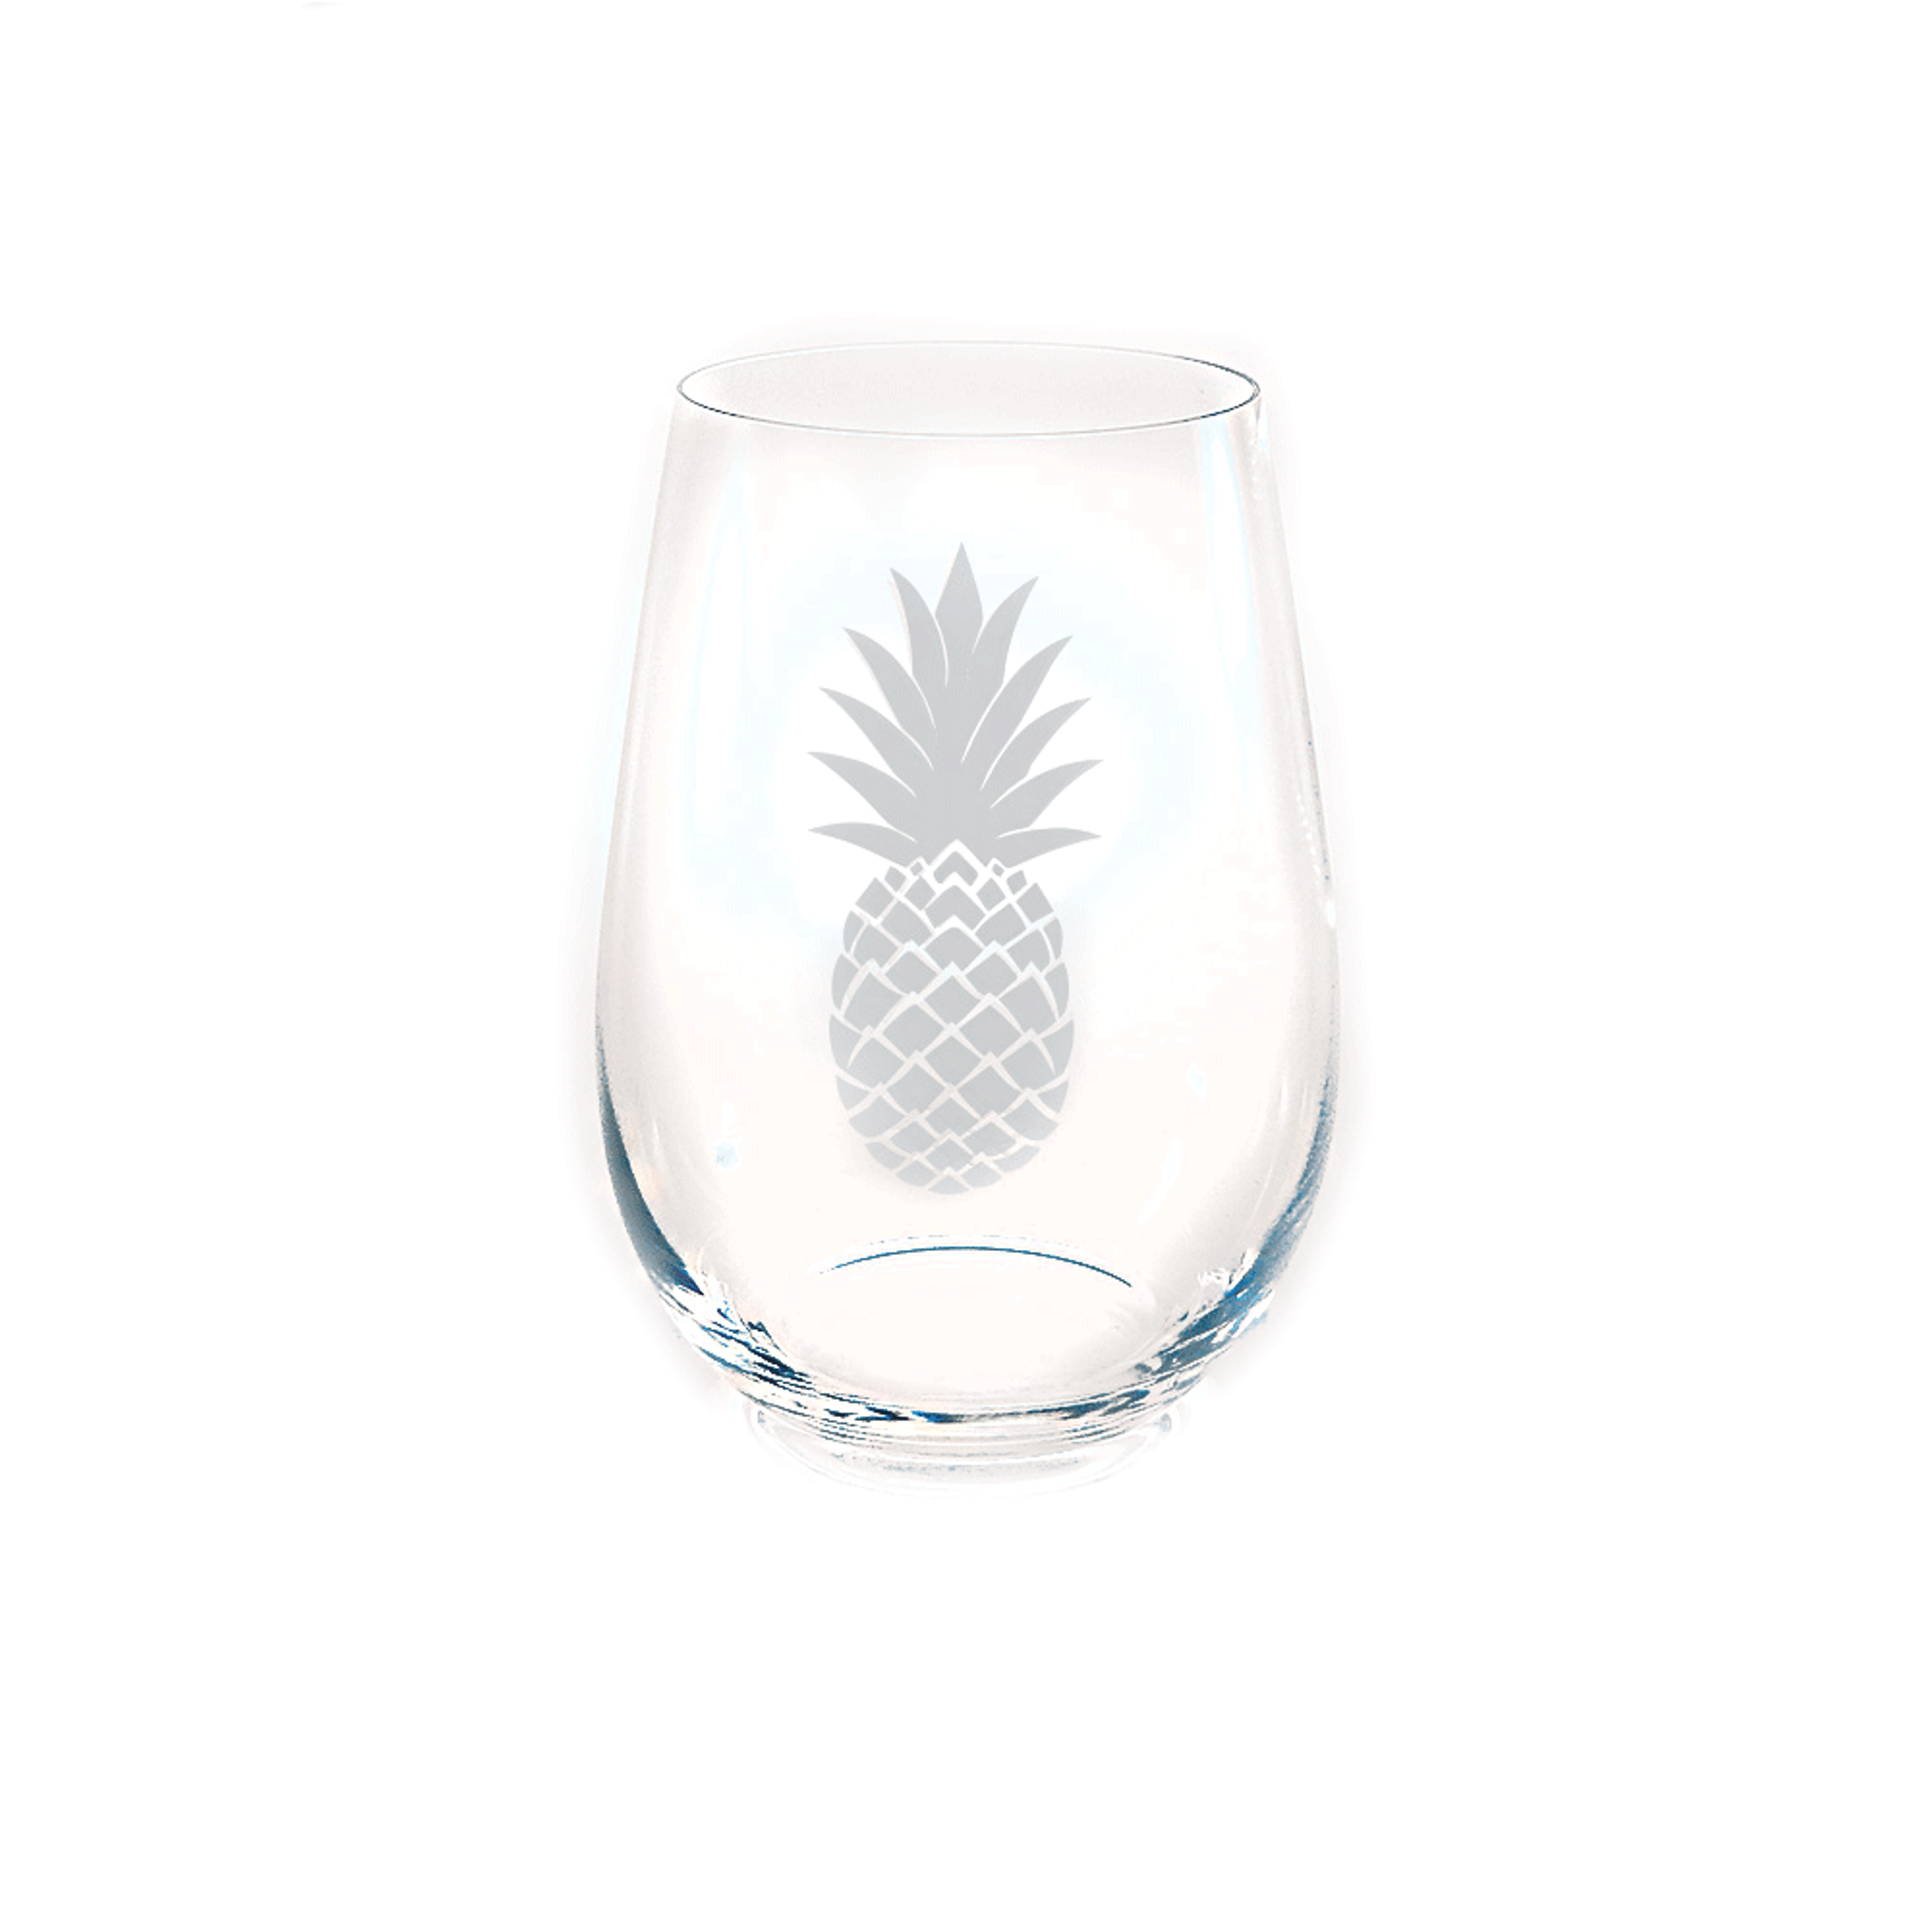 https://cdn11.bigcommerce.com/s-b5w84/images/stencil/2048x2048/products/2421/3980/CS5004-Pineapple__81129.1580938652.png?c=2